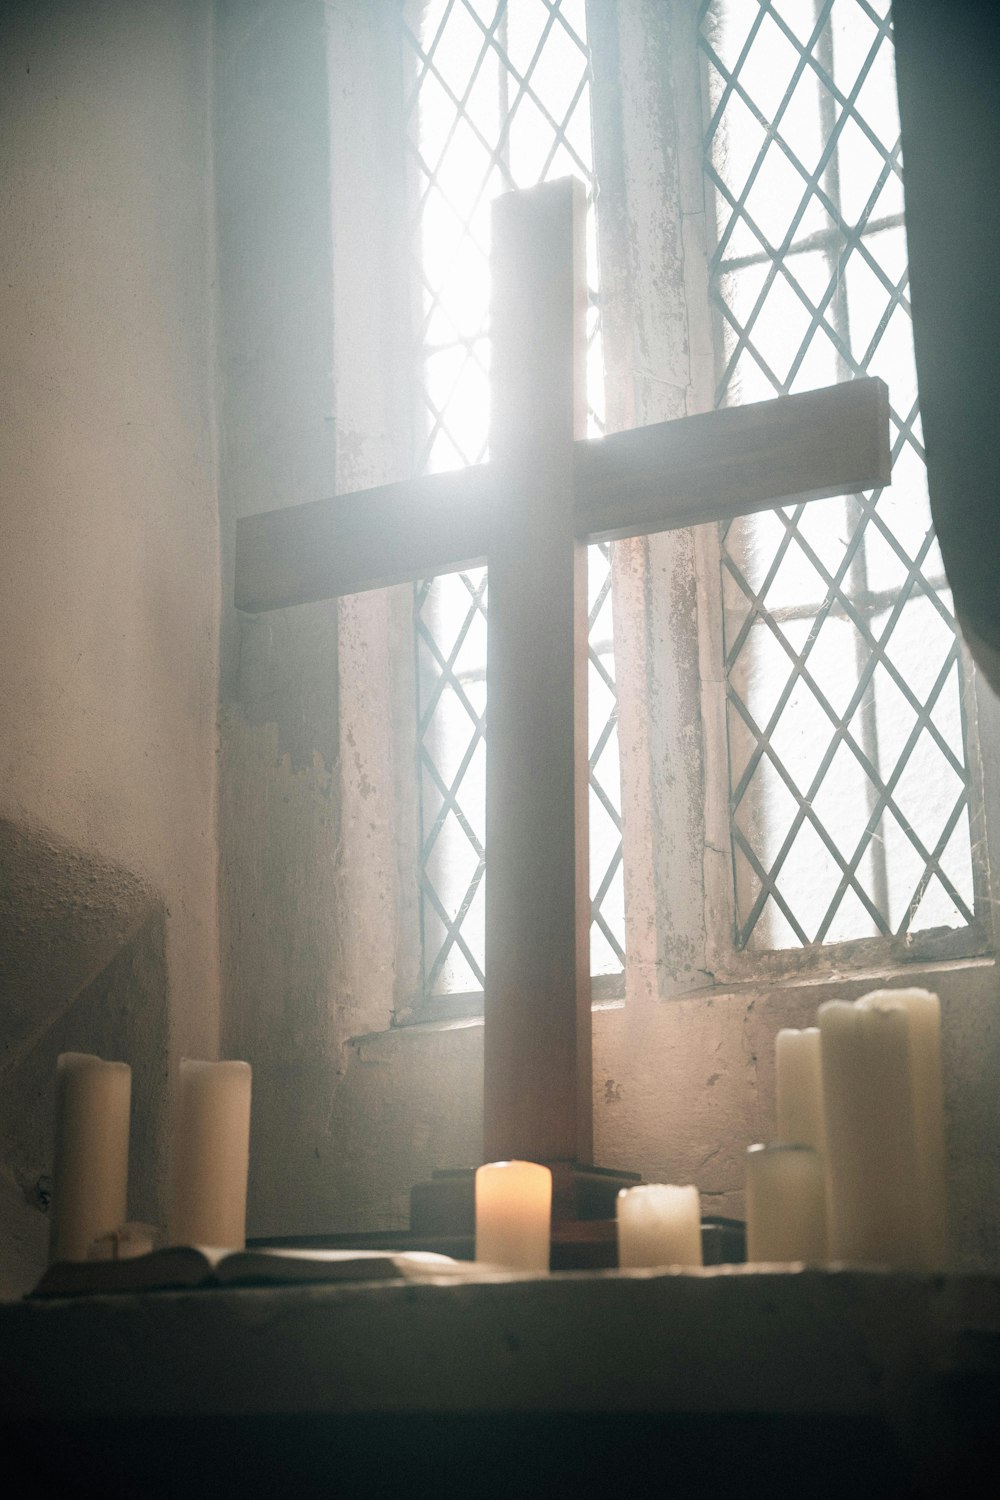 a cross and candles in front of a window